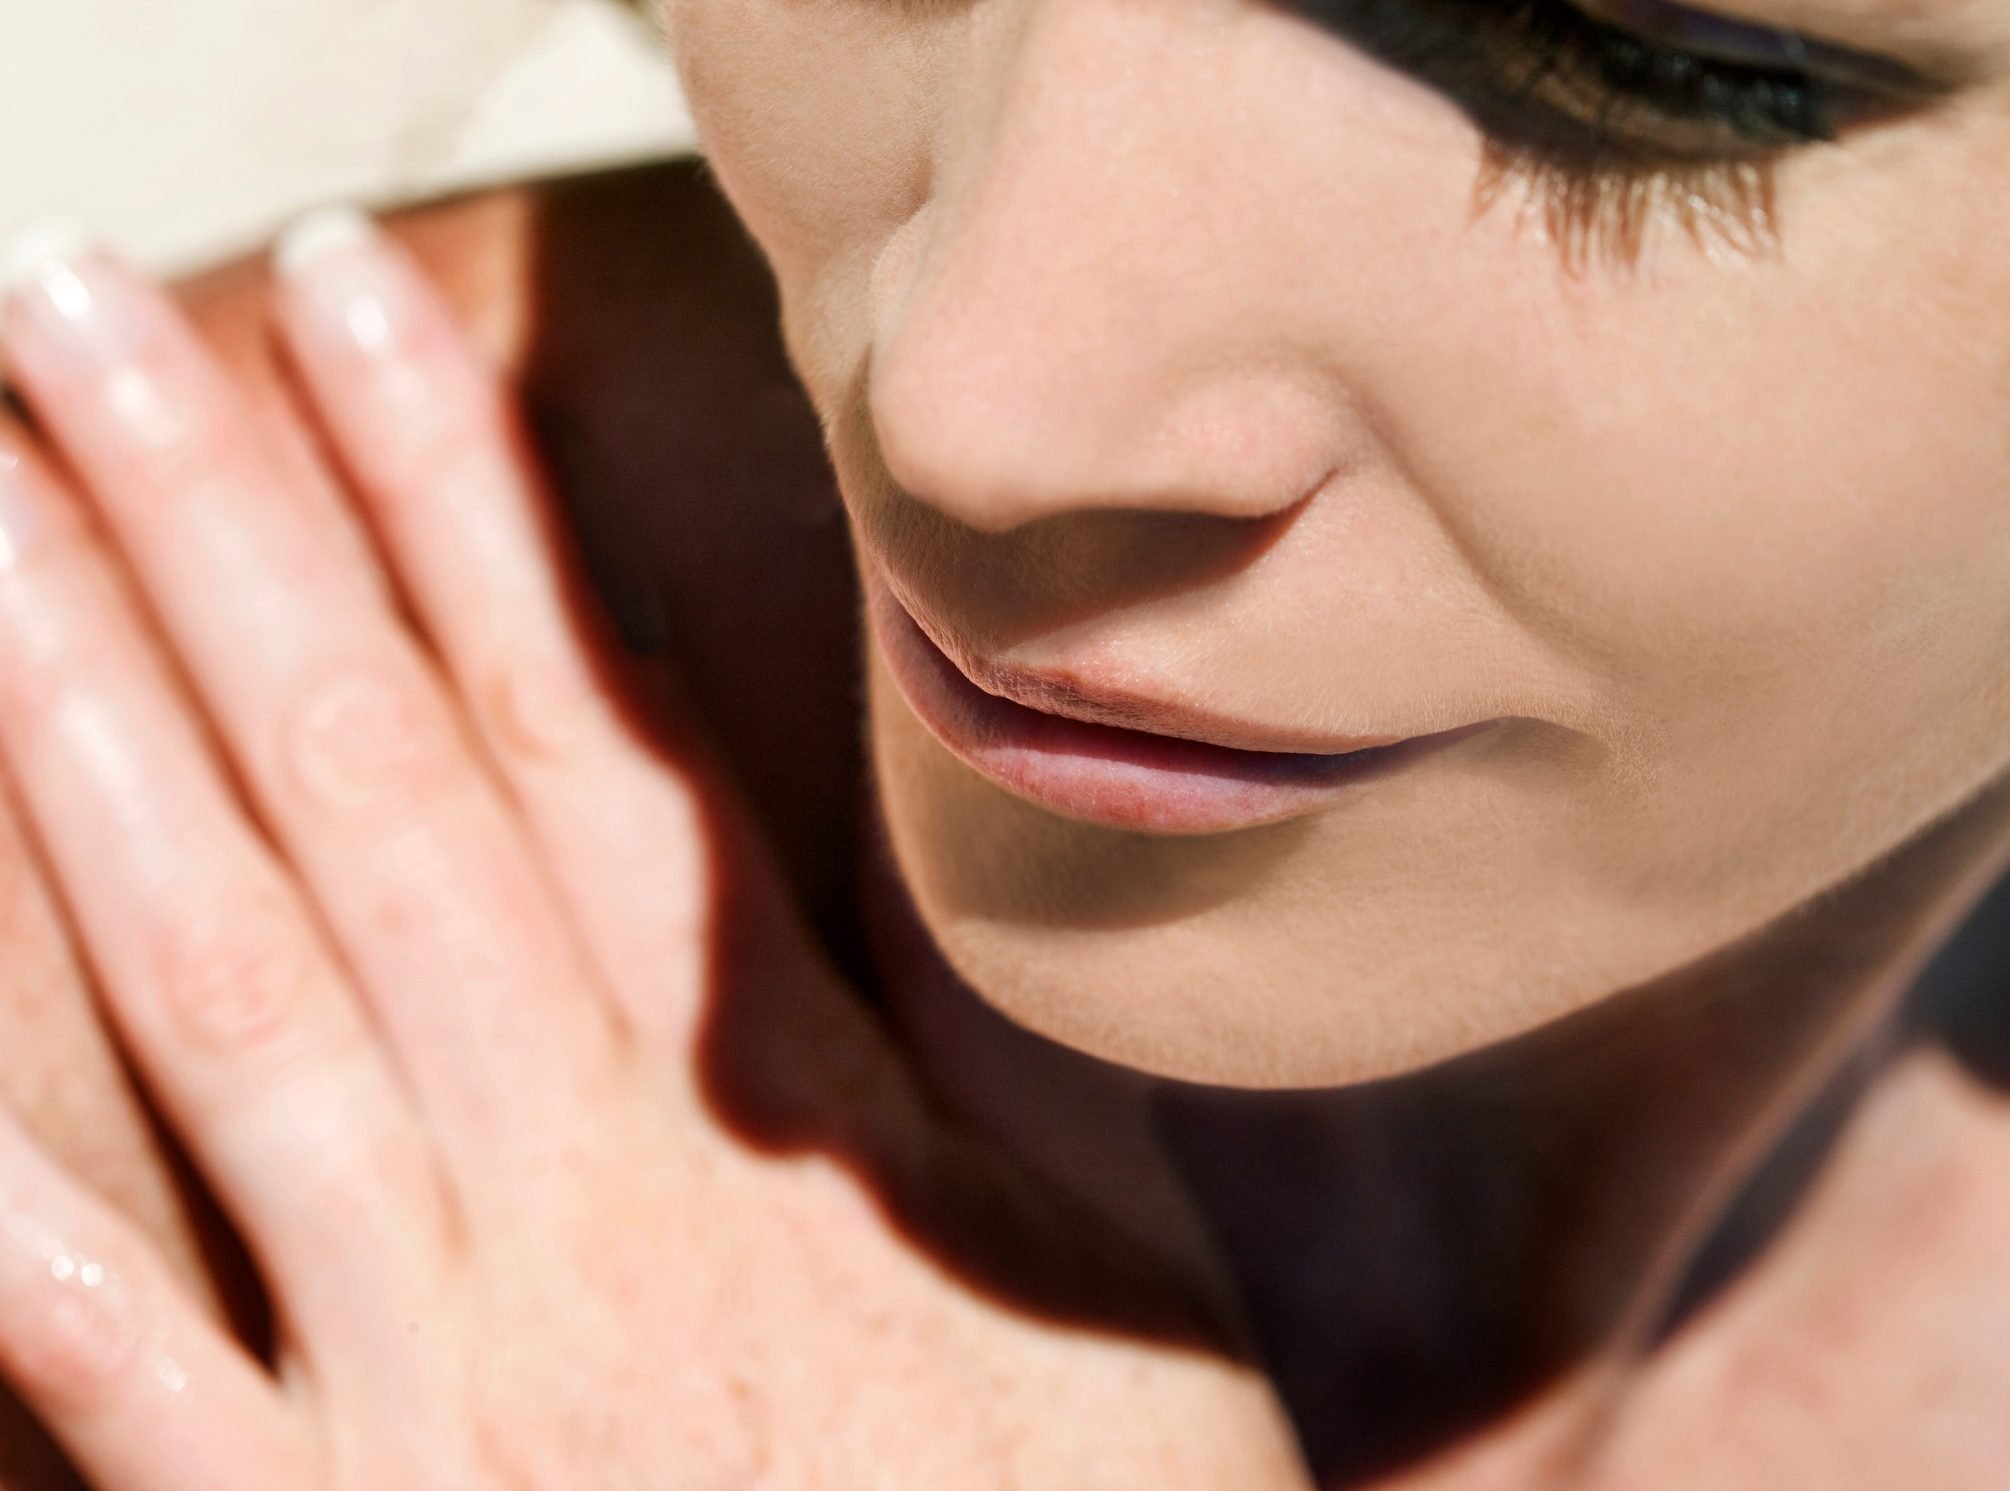 The $10 Trick That Could Curb Sun-Related Herpes Outbreaks